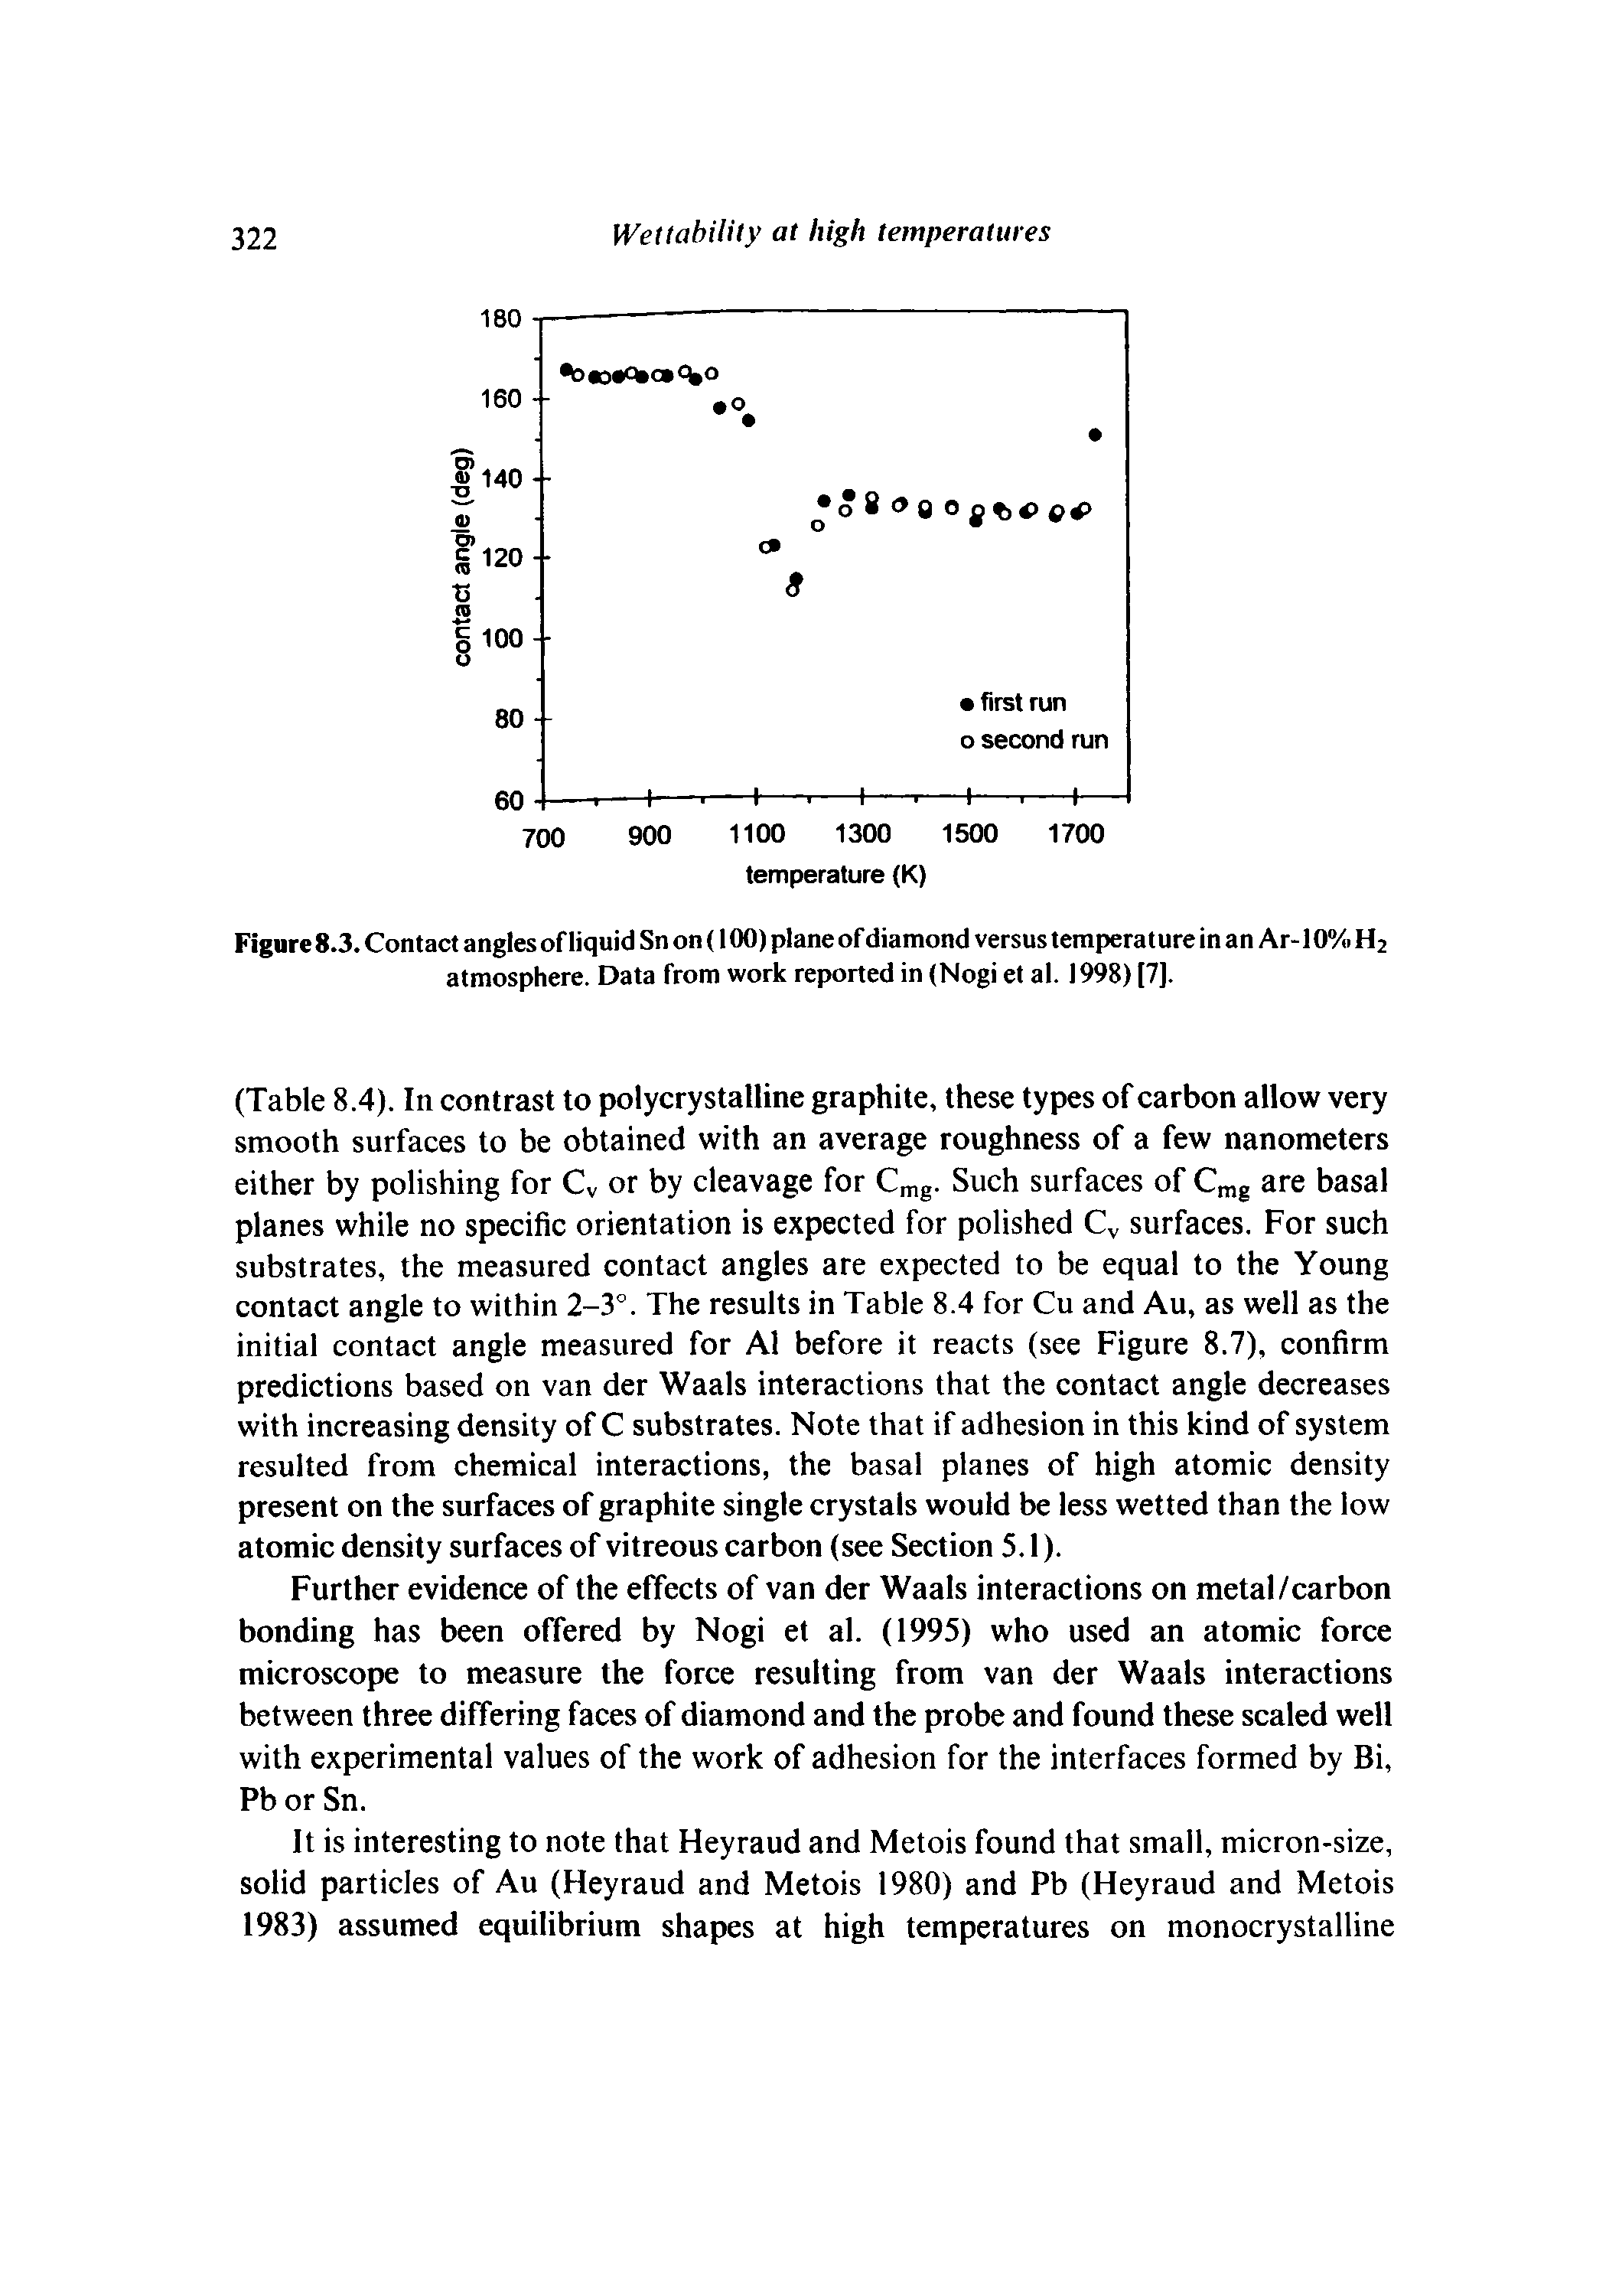 Figure 8.3. Contact angles of liquid Sn on (100) plane of diamond versus temperature in an Ar-10% H2 atmosphere. Data from work reported in (Nogi et al. 1998) [7].